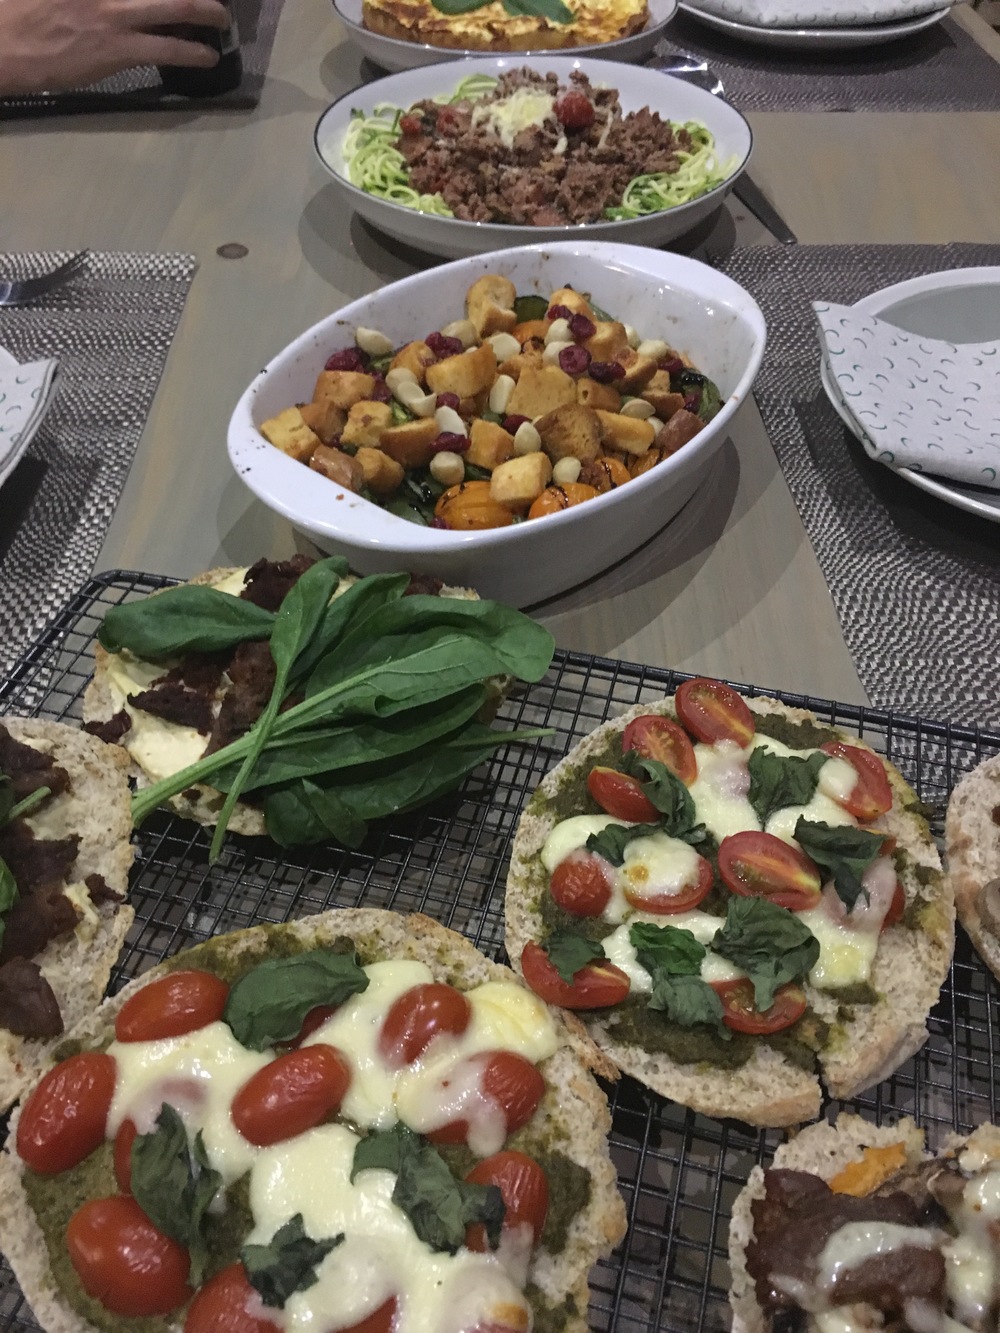  The Italian spread, served family style 